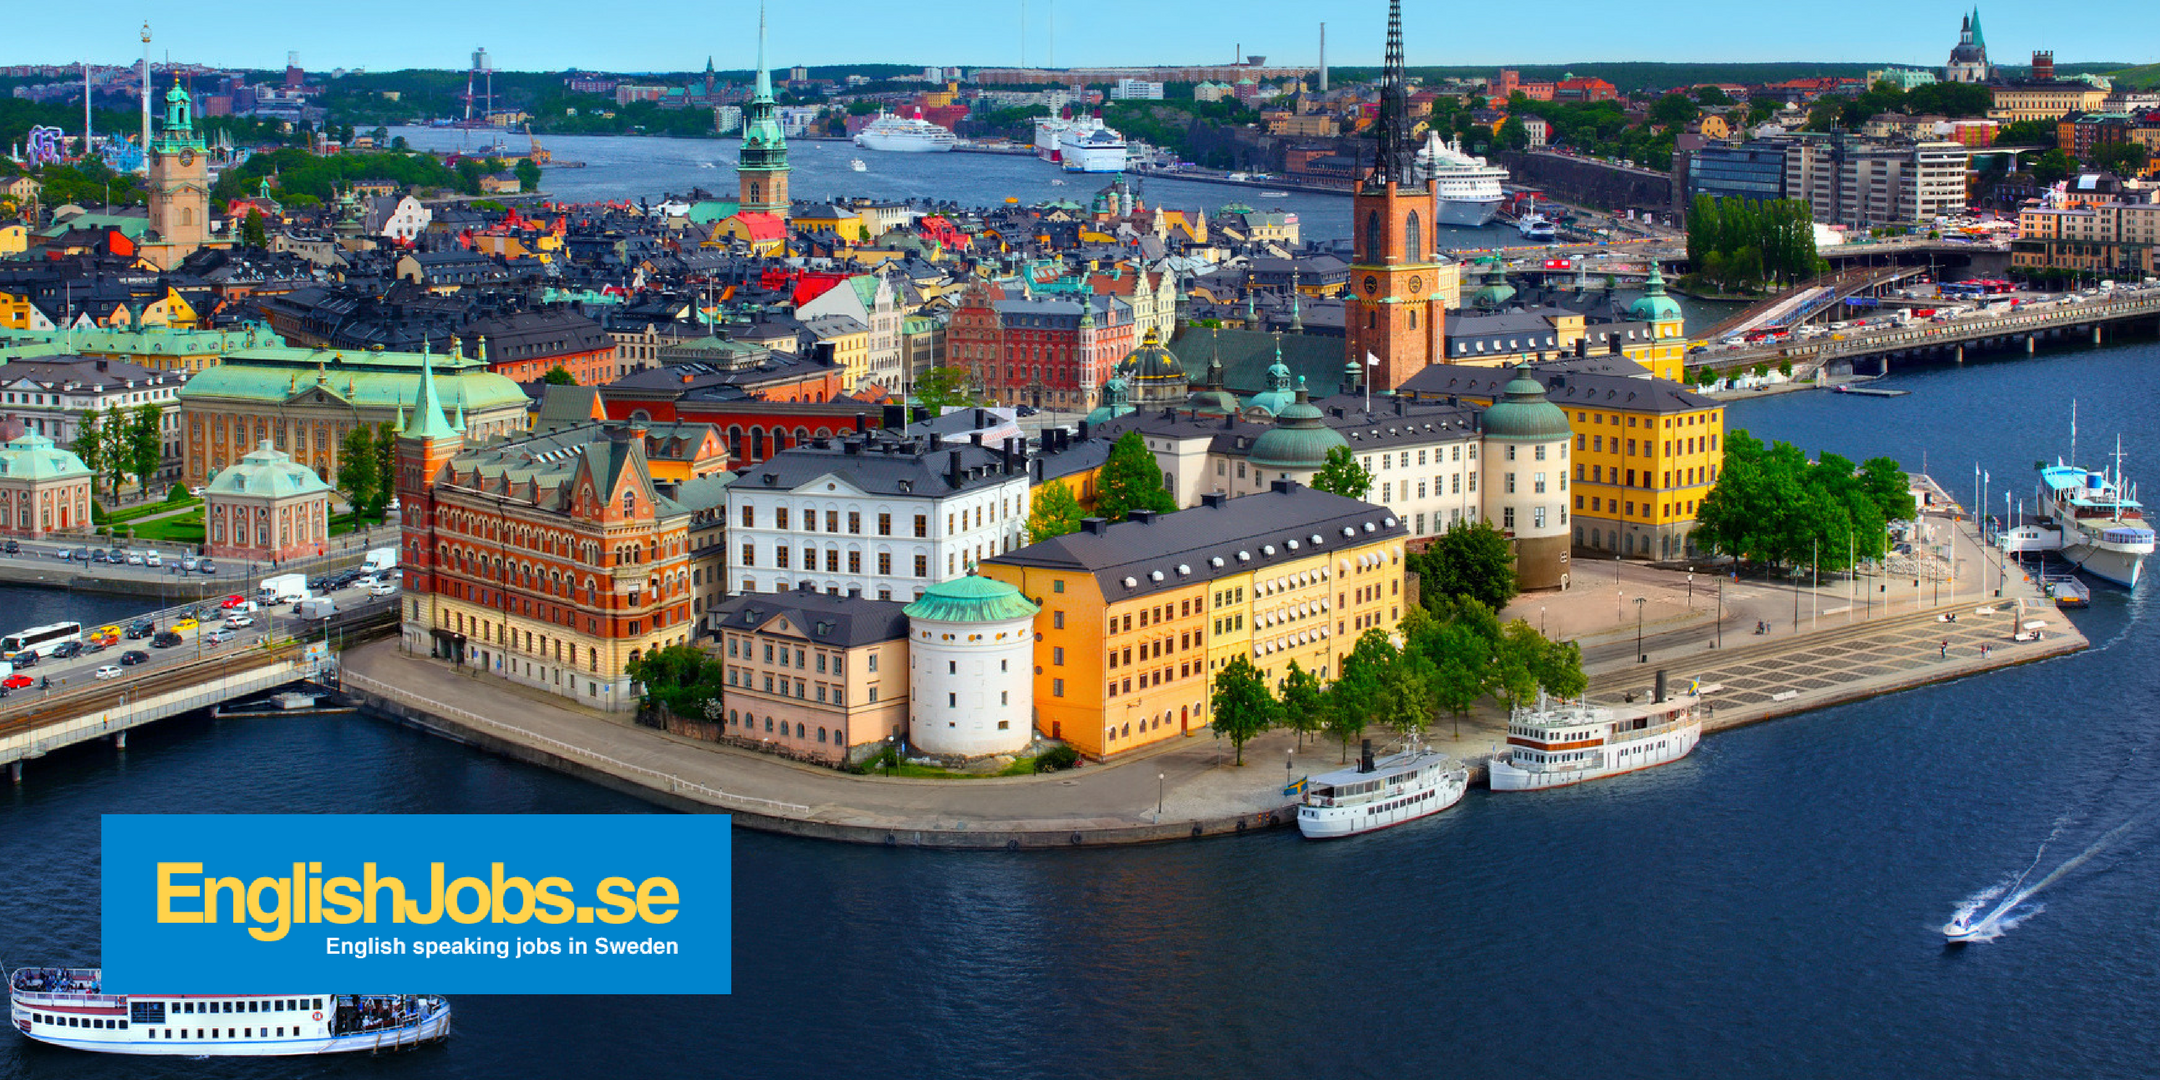 Work in Europe (Sweden, Denmark, Germany) - Your job search from Denver to Stockholm